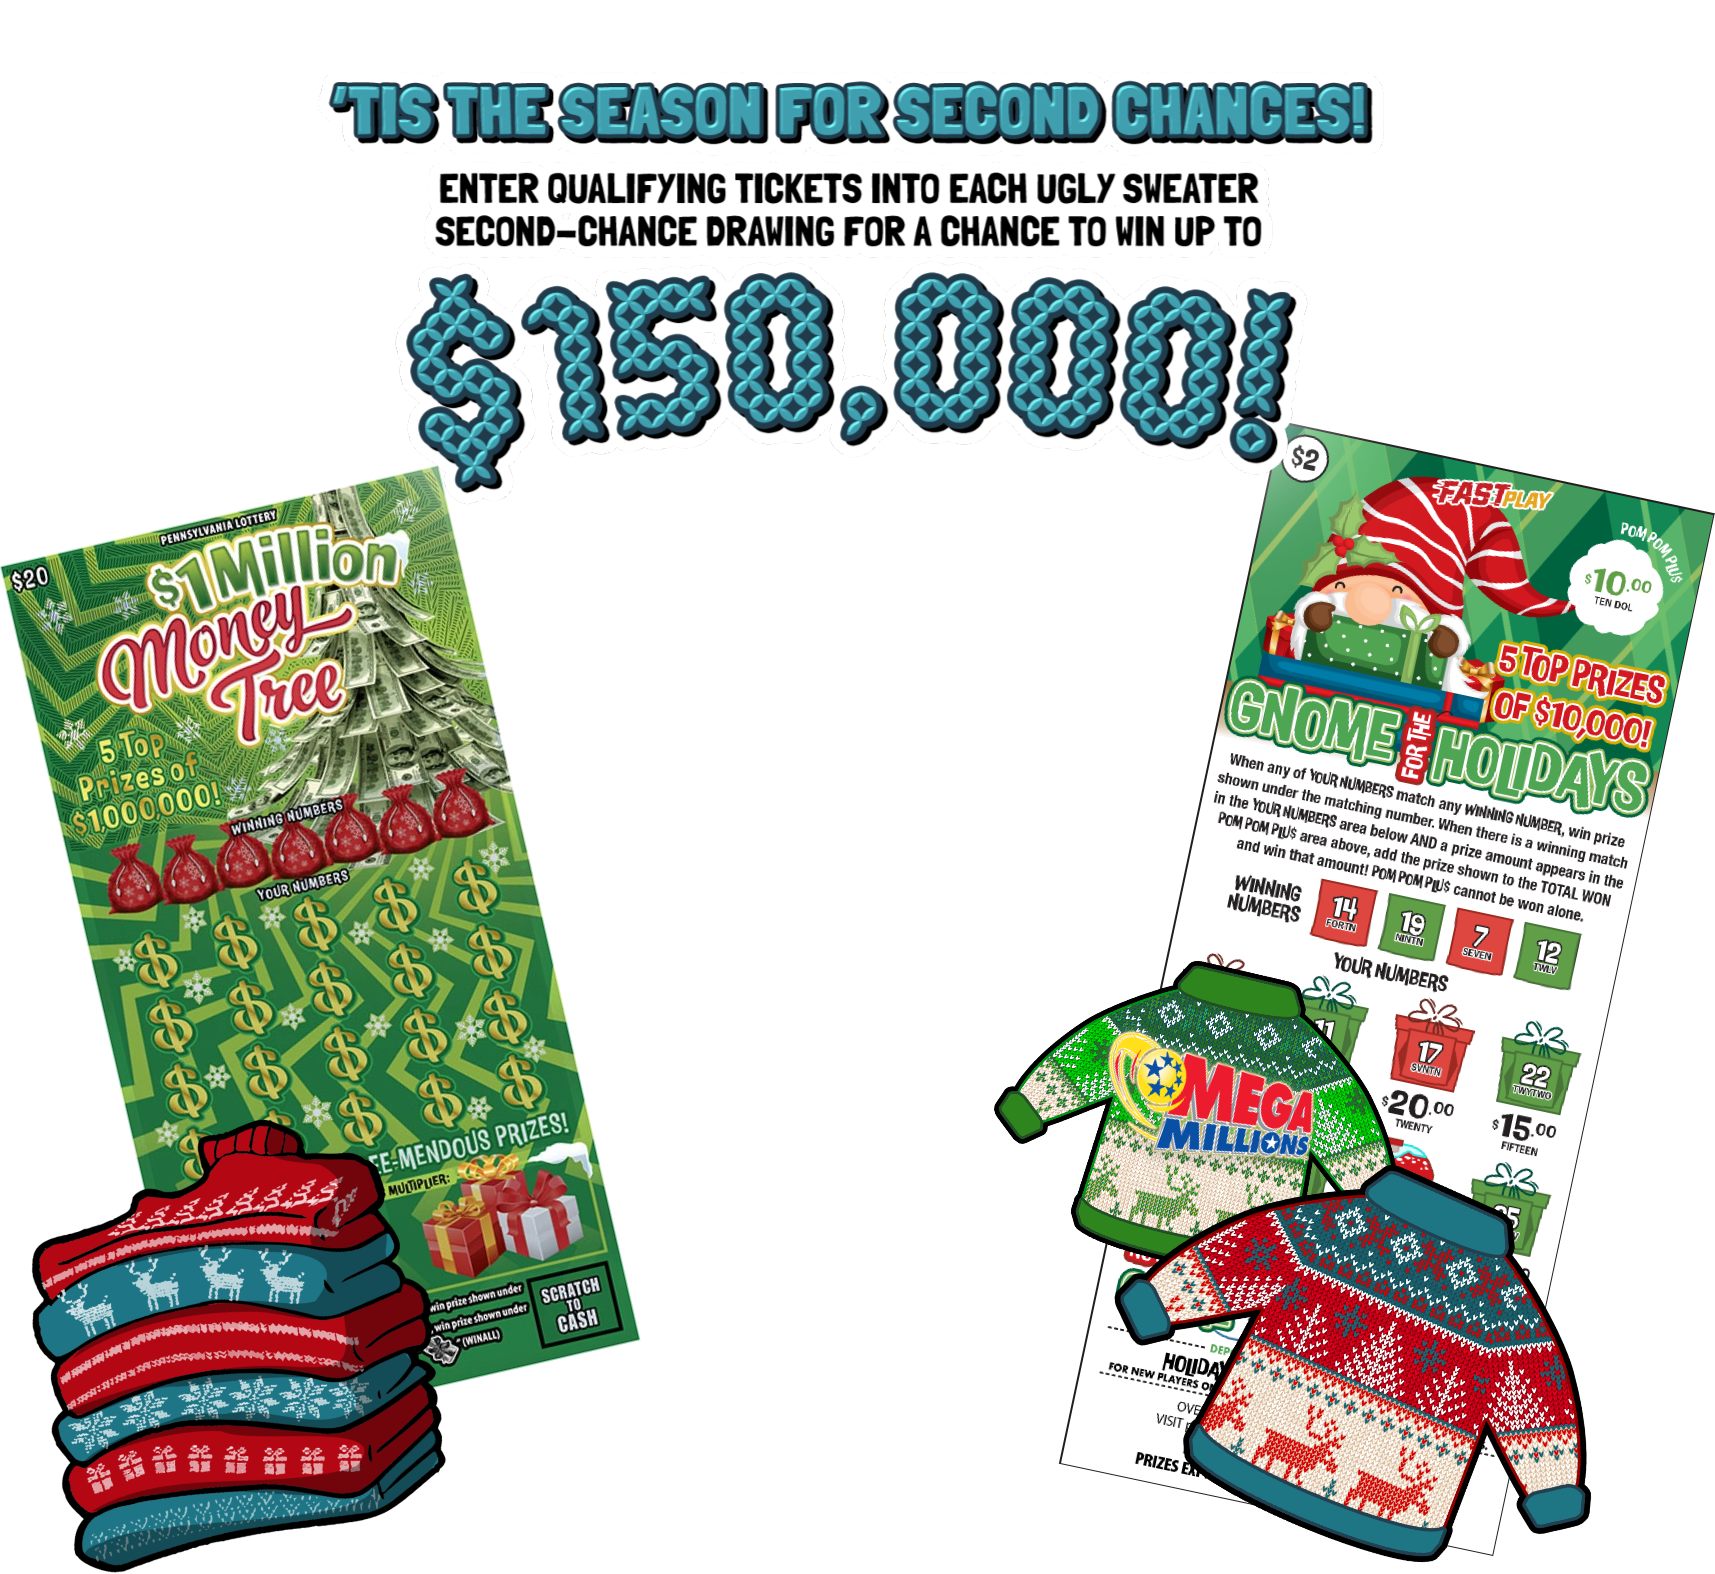 Enter qualifying tickets into each ugly sweater second chance drawing for a chance to win up to $150,000!